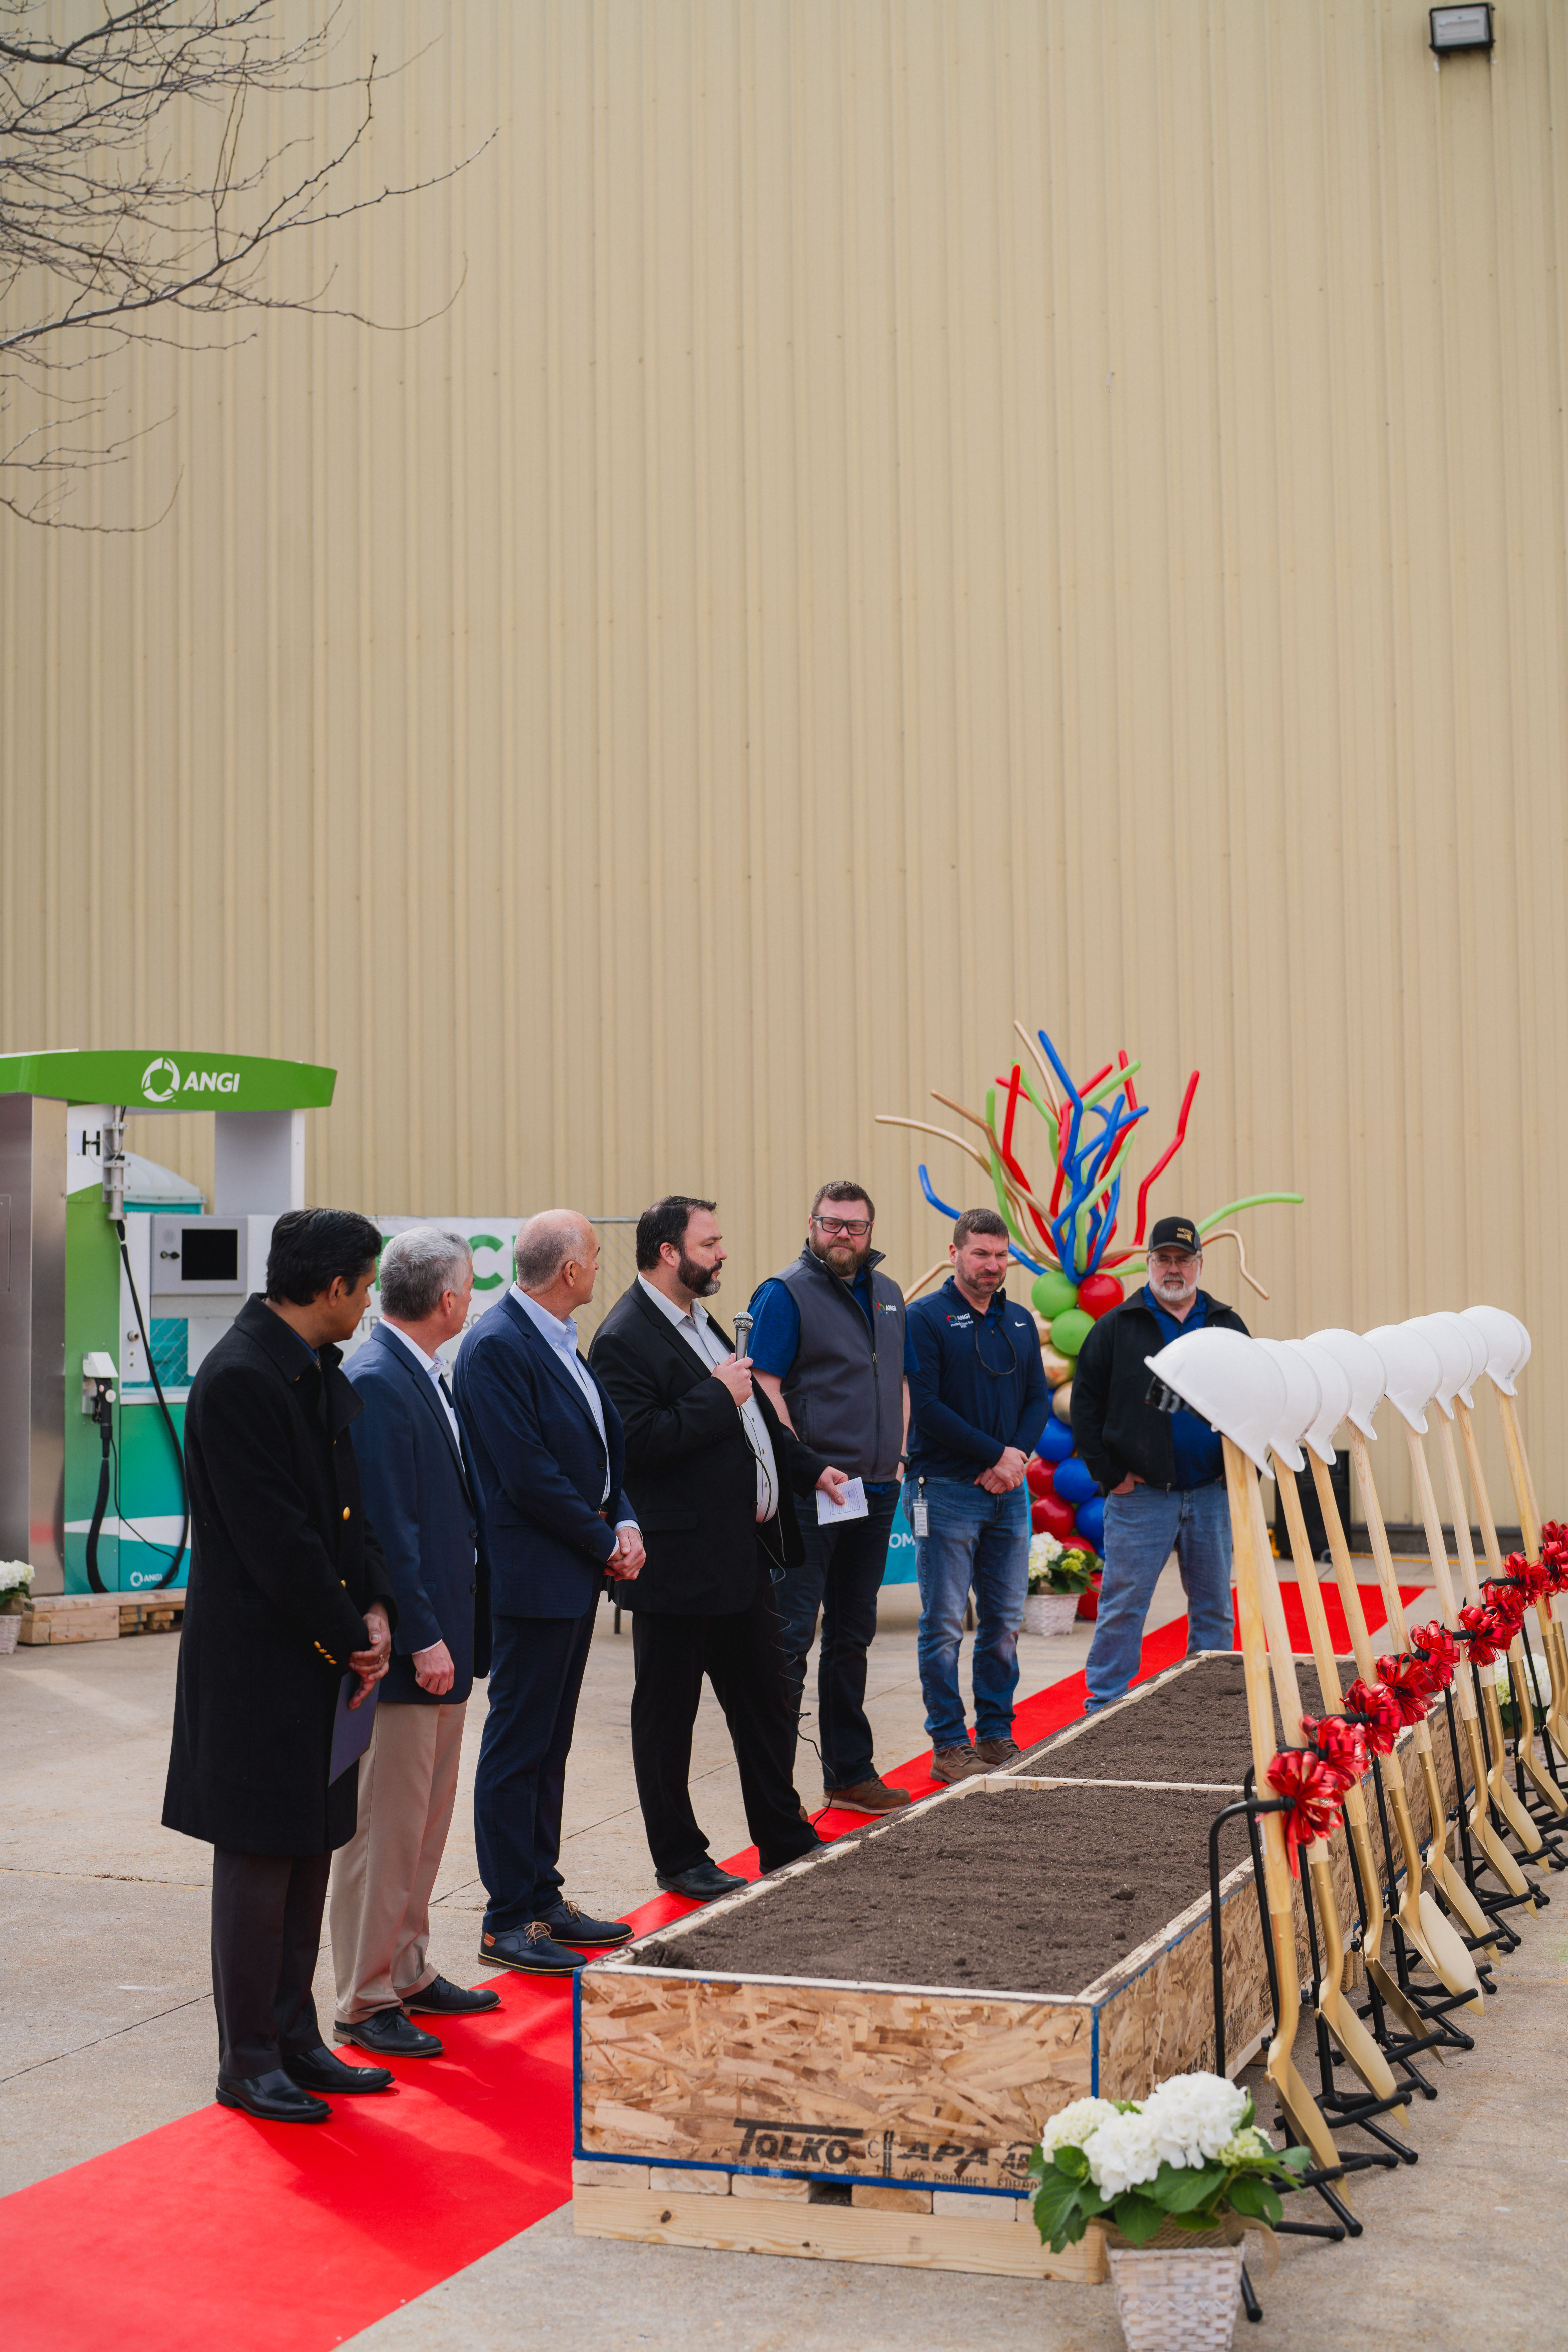 ANGI Energy Systems Breaks New Ground By Starting Construction Of The Midwest’s First Hydrogen Refueling Test Facility